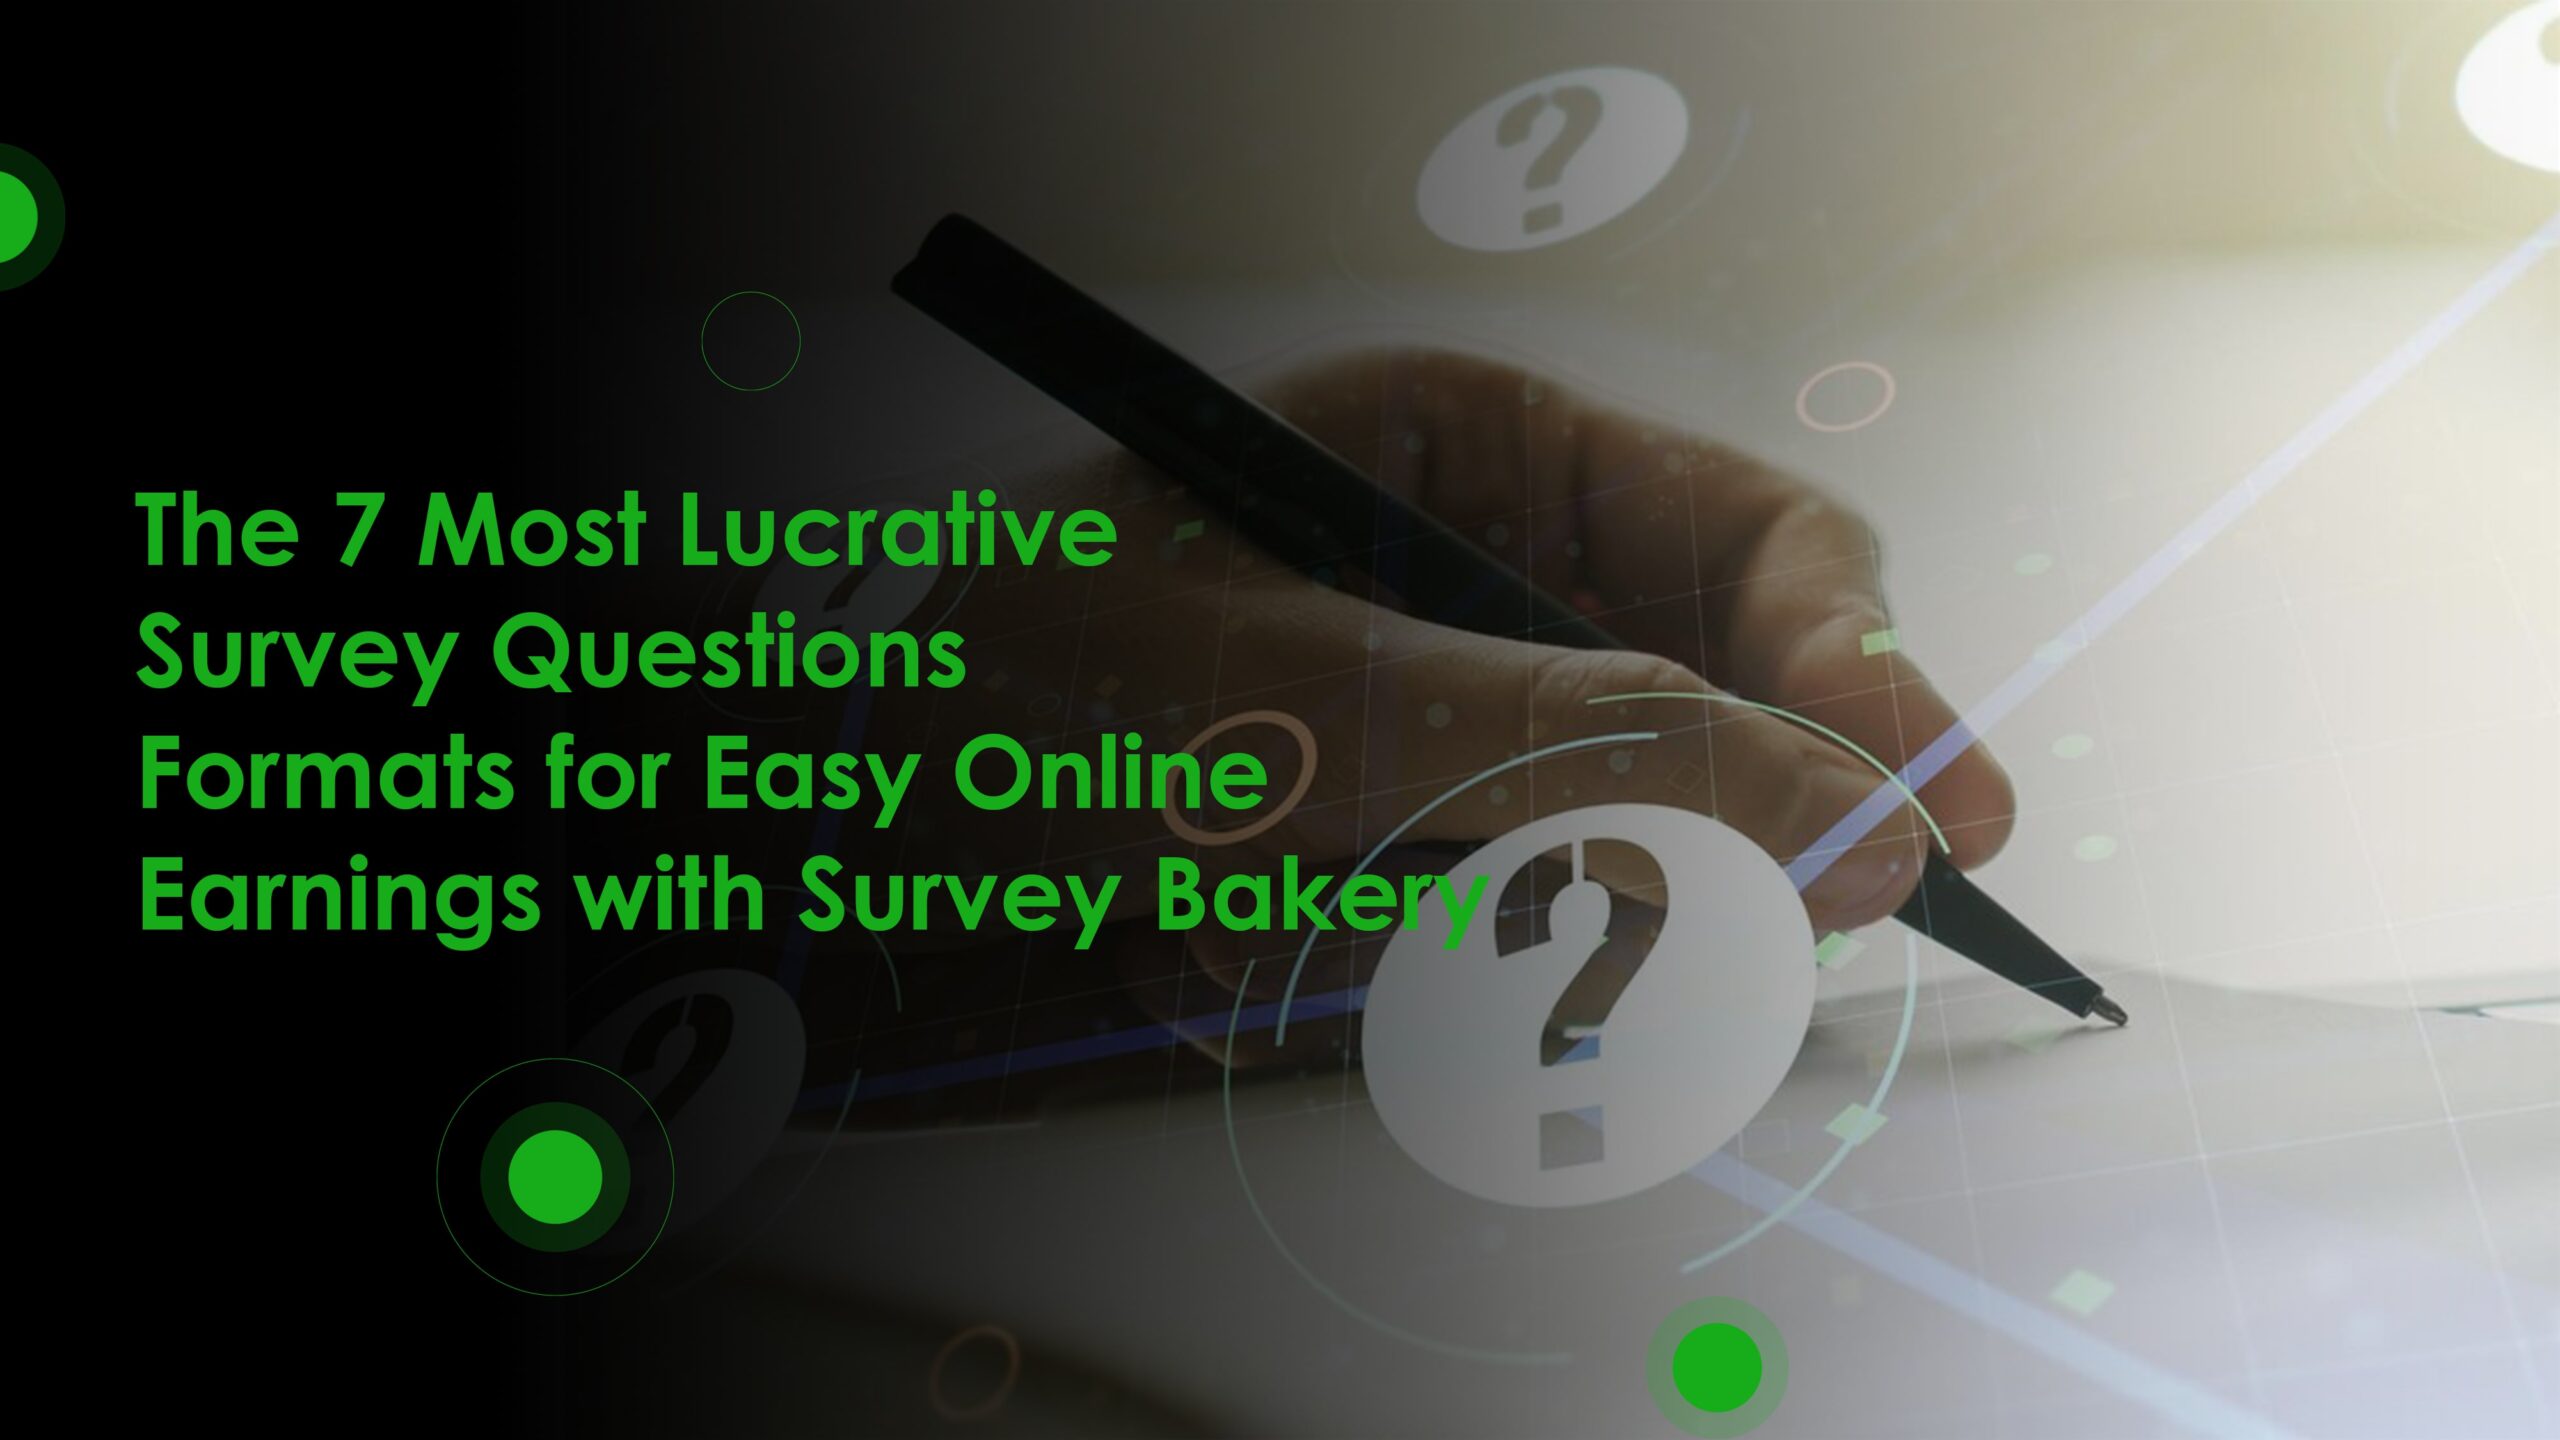 You are currently viewing The 7 Most Lucrative Survey Questions Formats for Easy Online Earnings with Survey Bakery